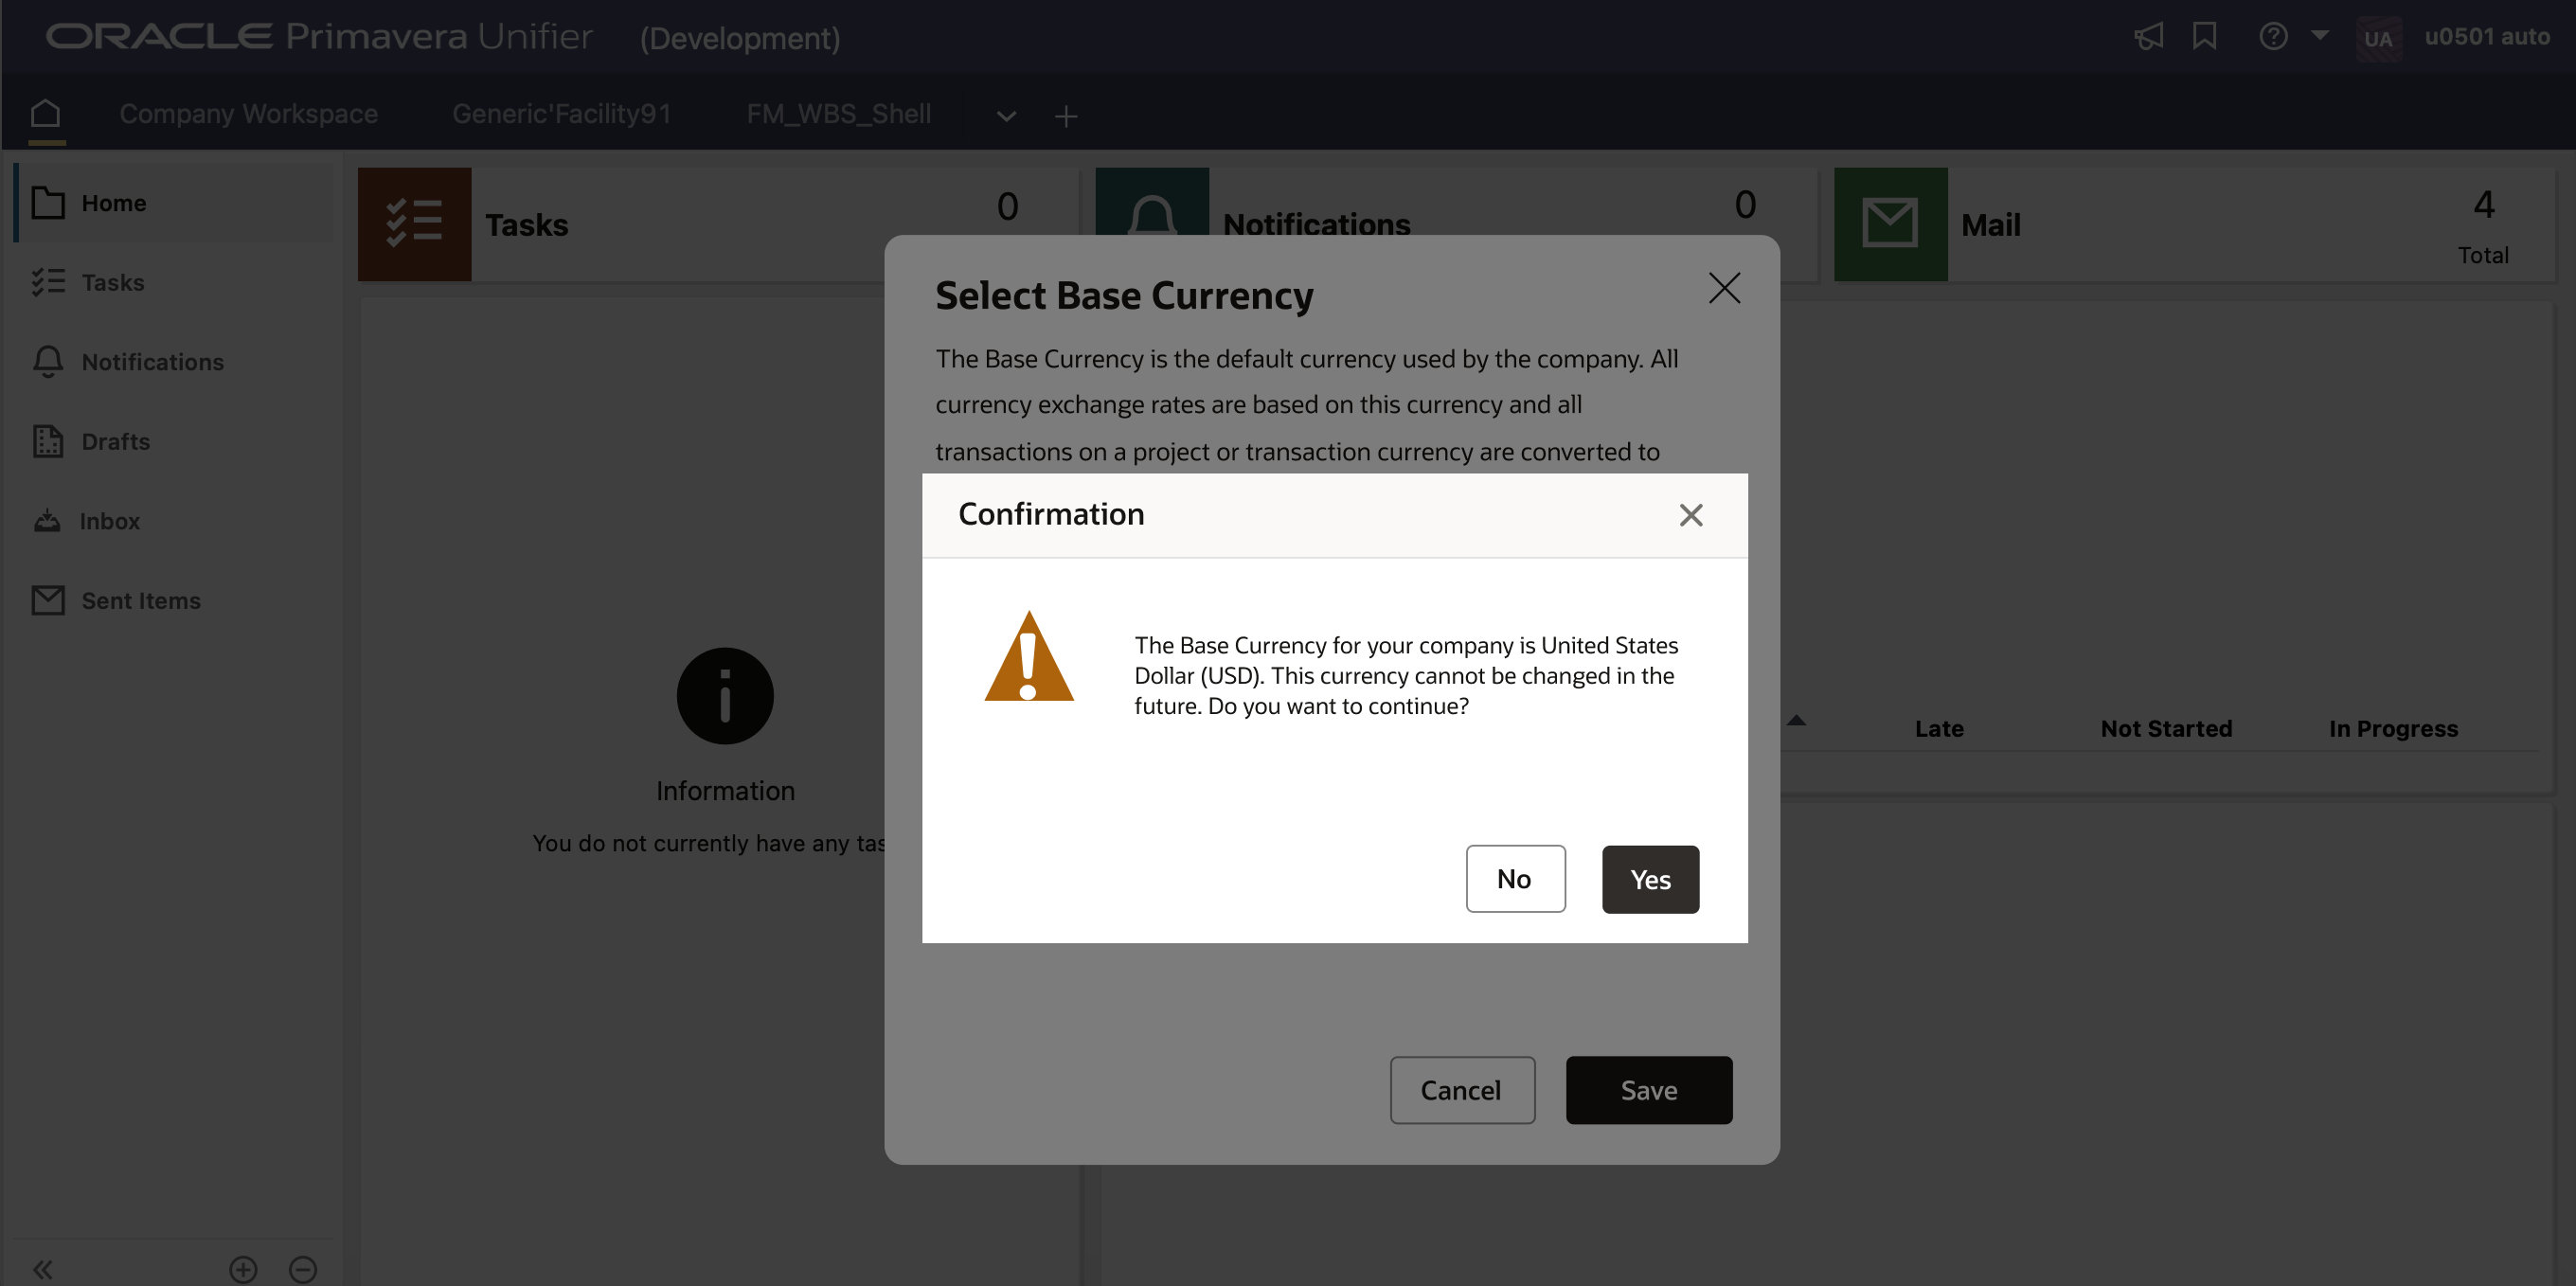 Screen image of a pop-up window asking the company administrator whether or not the choice of base currency should be confirmed.